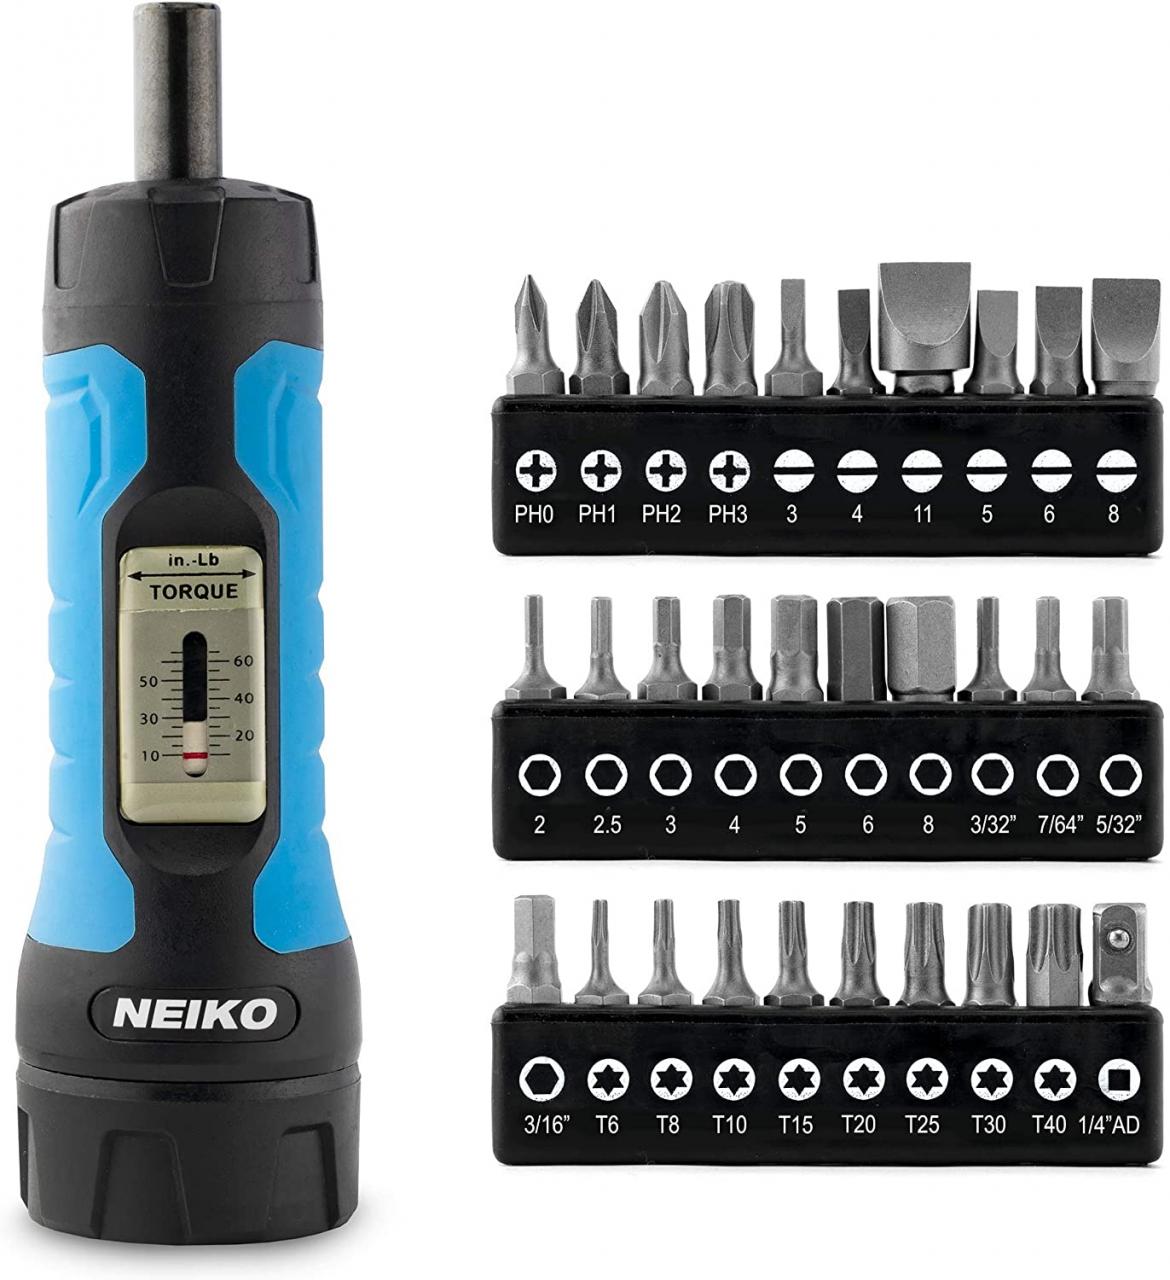 Buy NEIKO 10574A 1/4” Drive Torque Wrench Screwdriver Set | 30 Pieces of S2  Steel Philips, Hex, Slotted, and Torx Bits | 10 to 60 Inch-Pounds Torque  Adjustment Range | Firearms Accurizing